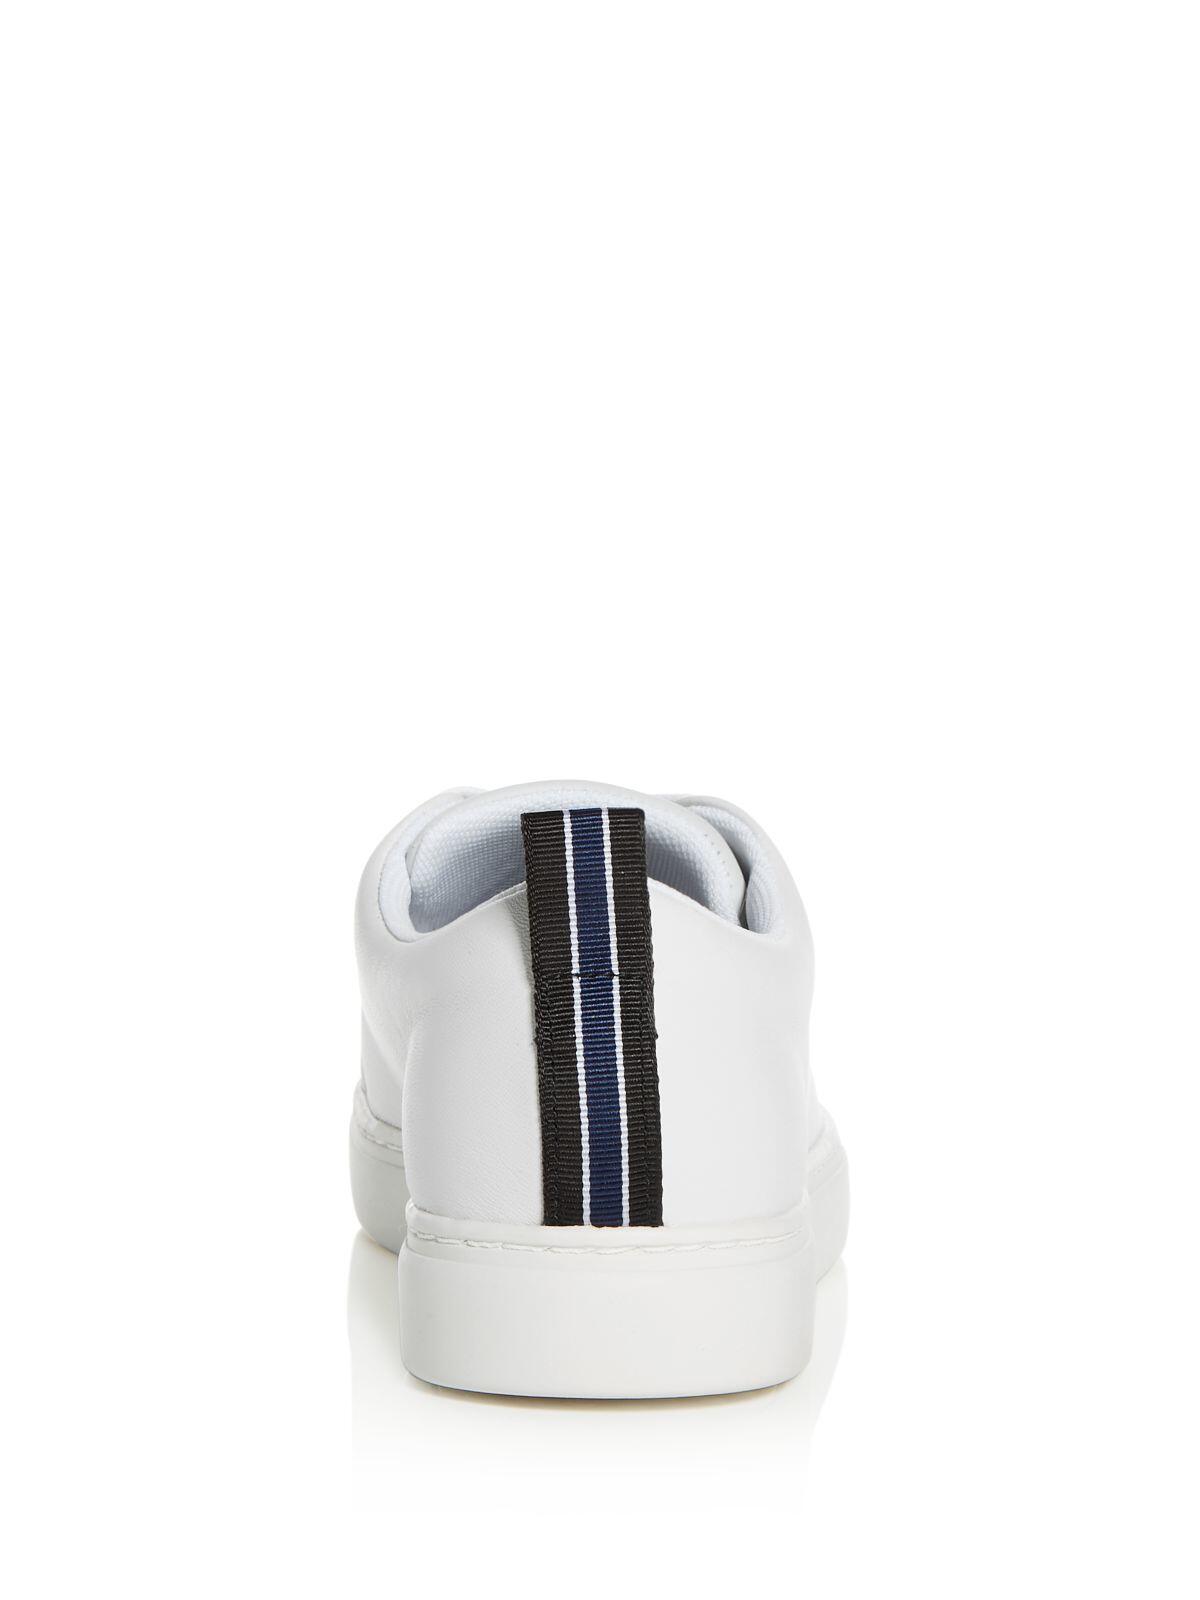 PAUL SMITH Mens White Tennis-Style Back Pull-Tab Padded Lee Round Toe Platform Lace-Up Leather Sneakers Shoes 11